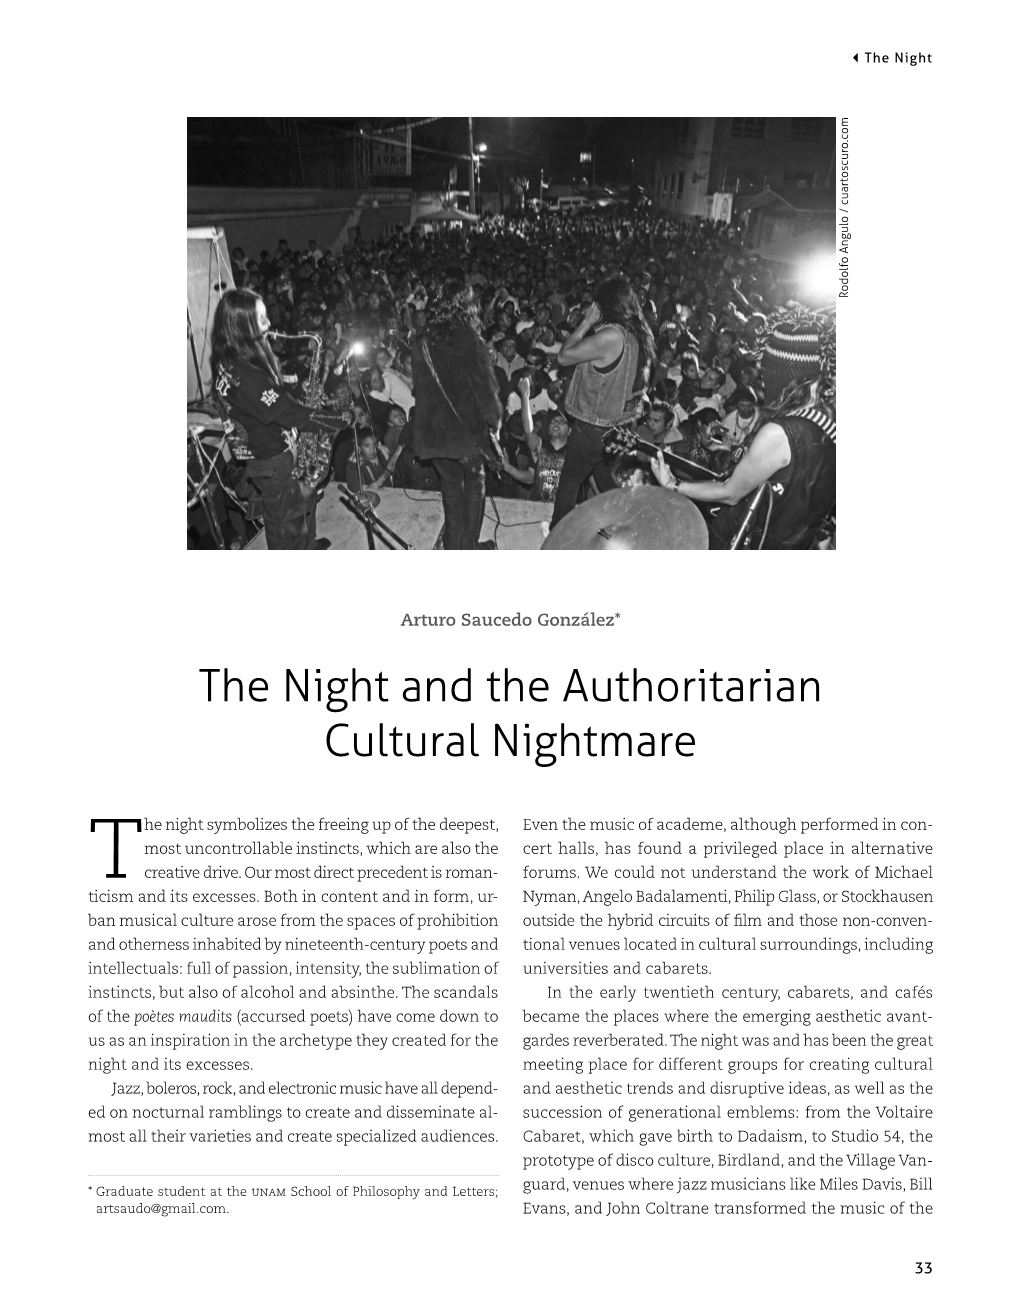 The Night and the Authoritarian Cultural Nightmare